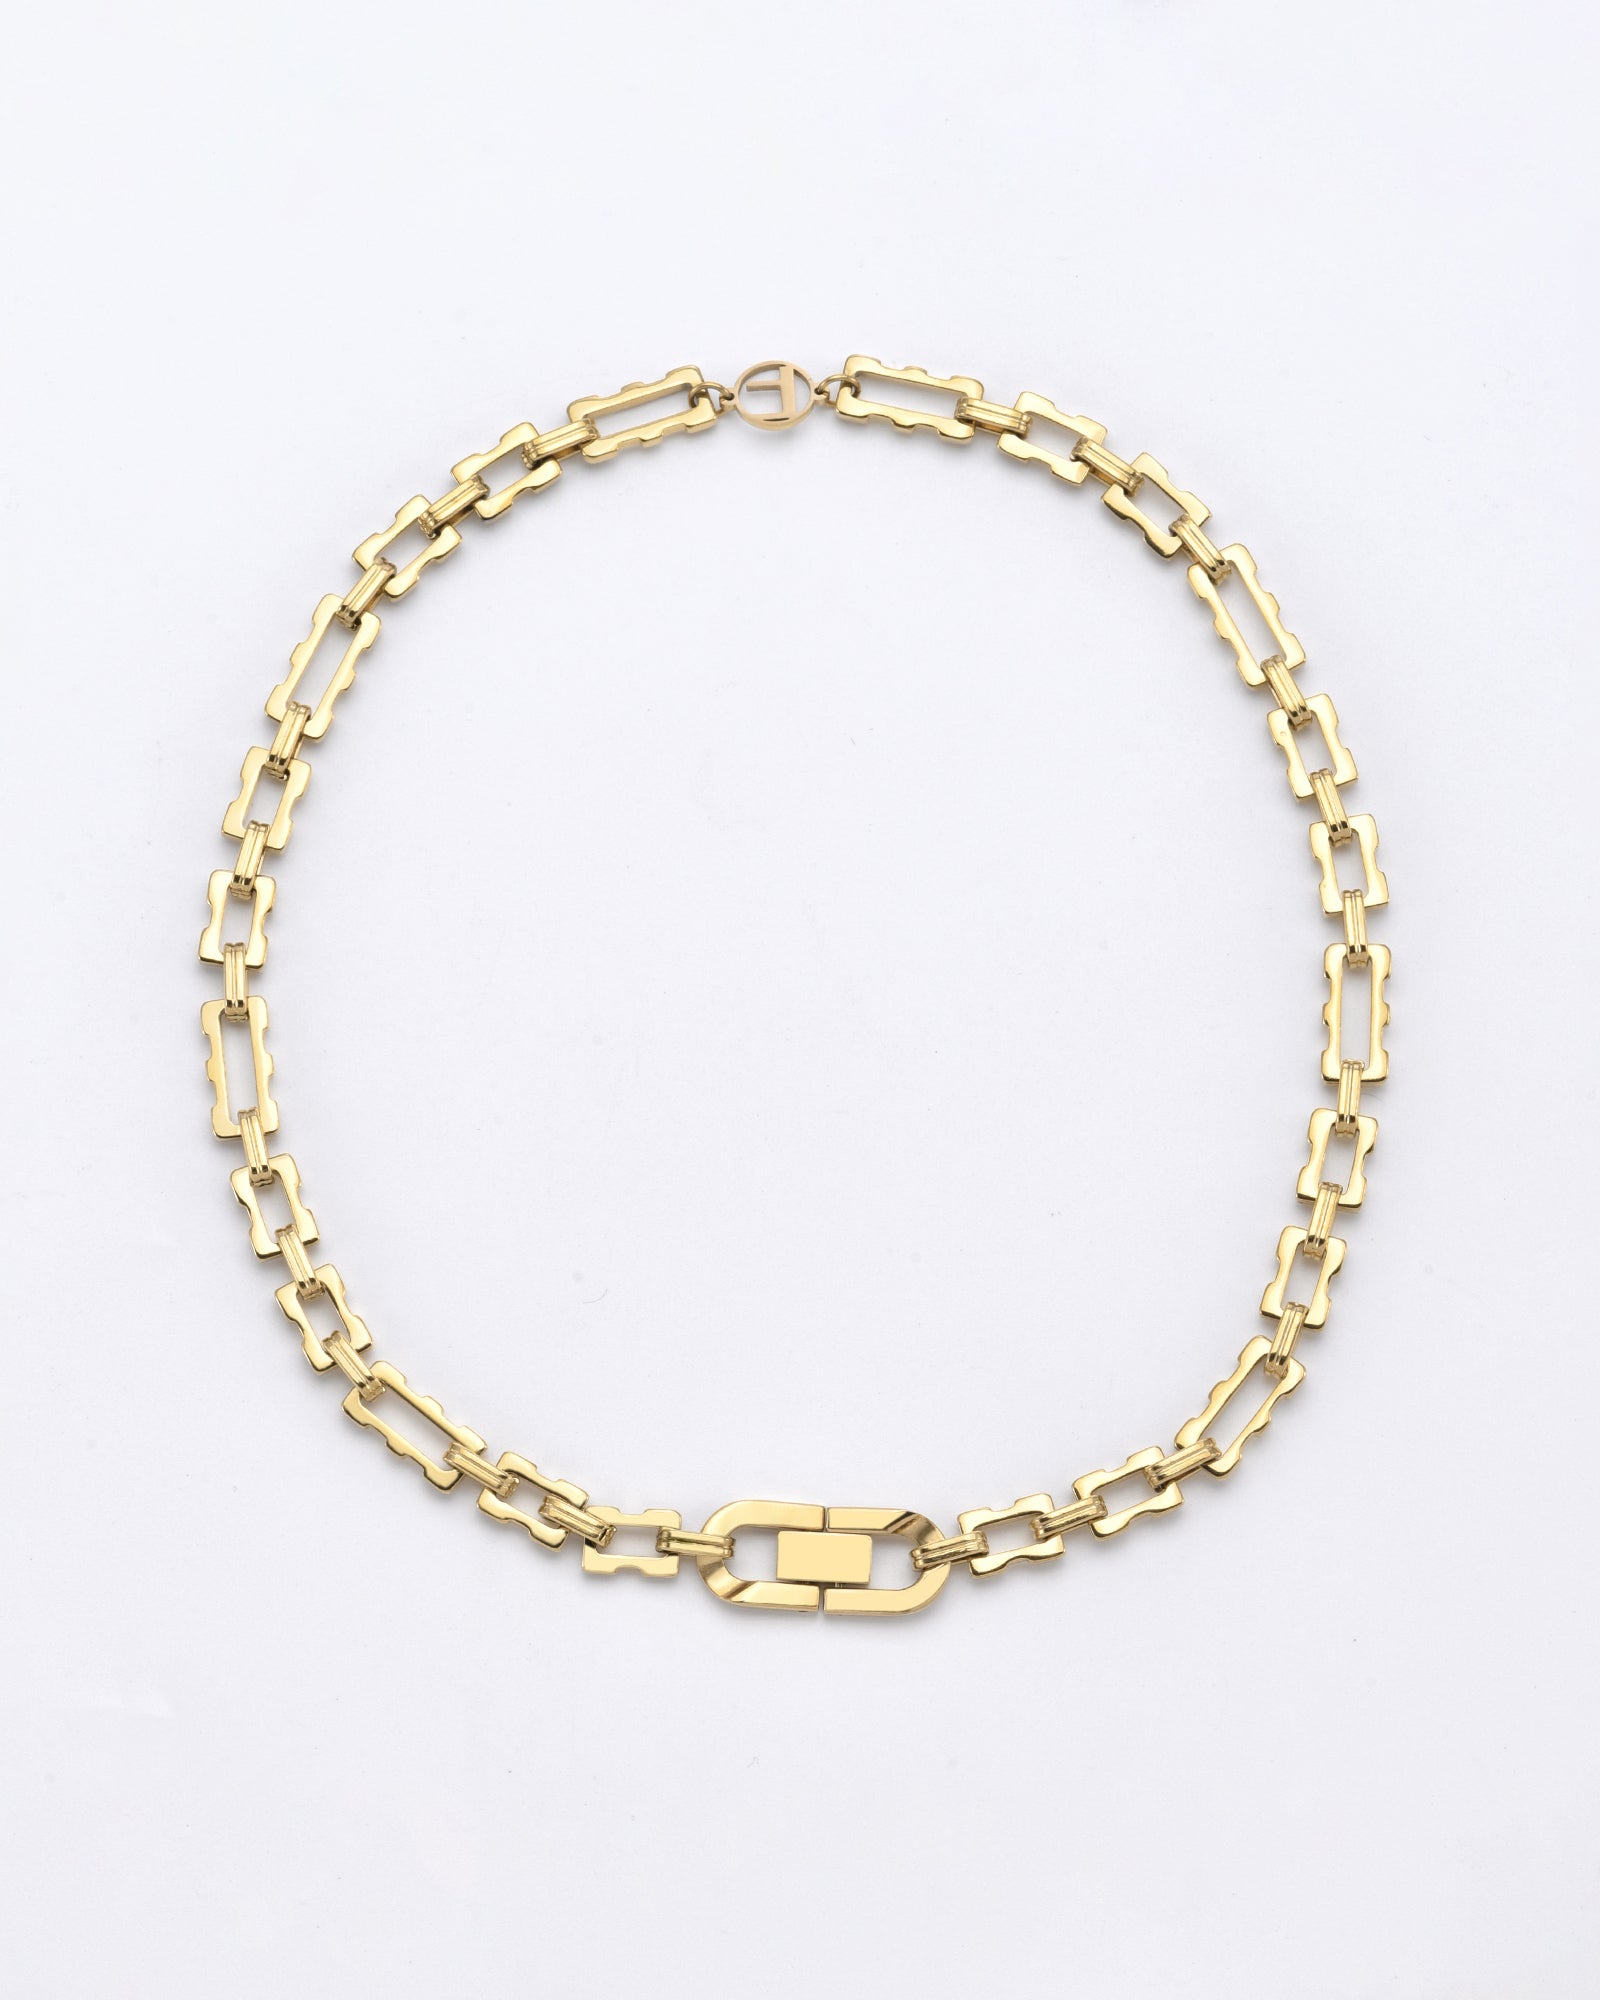 A 24k gold-plated chain necklace is displayed on a white background. The **Links Necklace Gold** by **For Art's Sake®** features interlocking rectangular links with a larger, distinct clasp at the center.